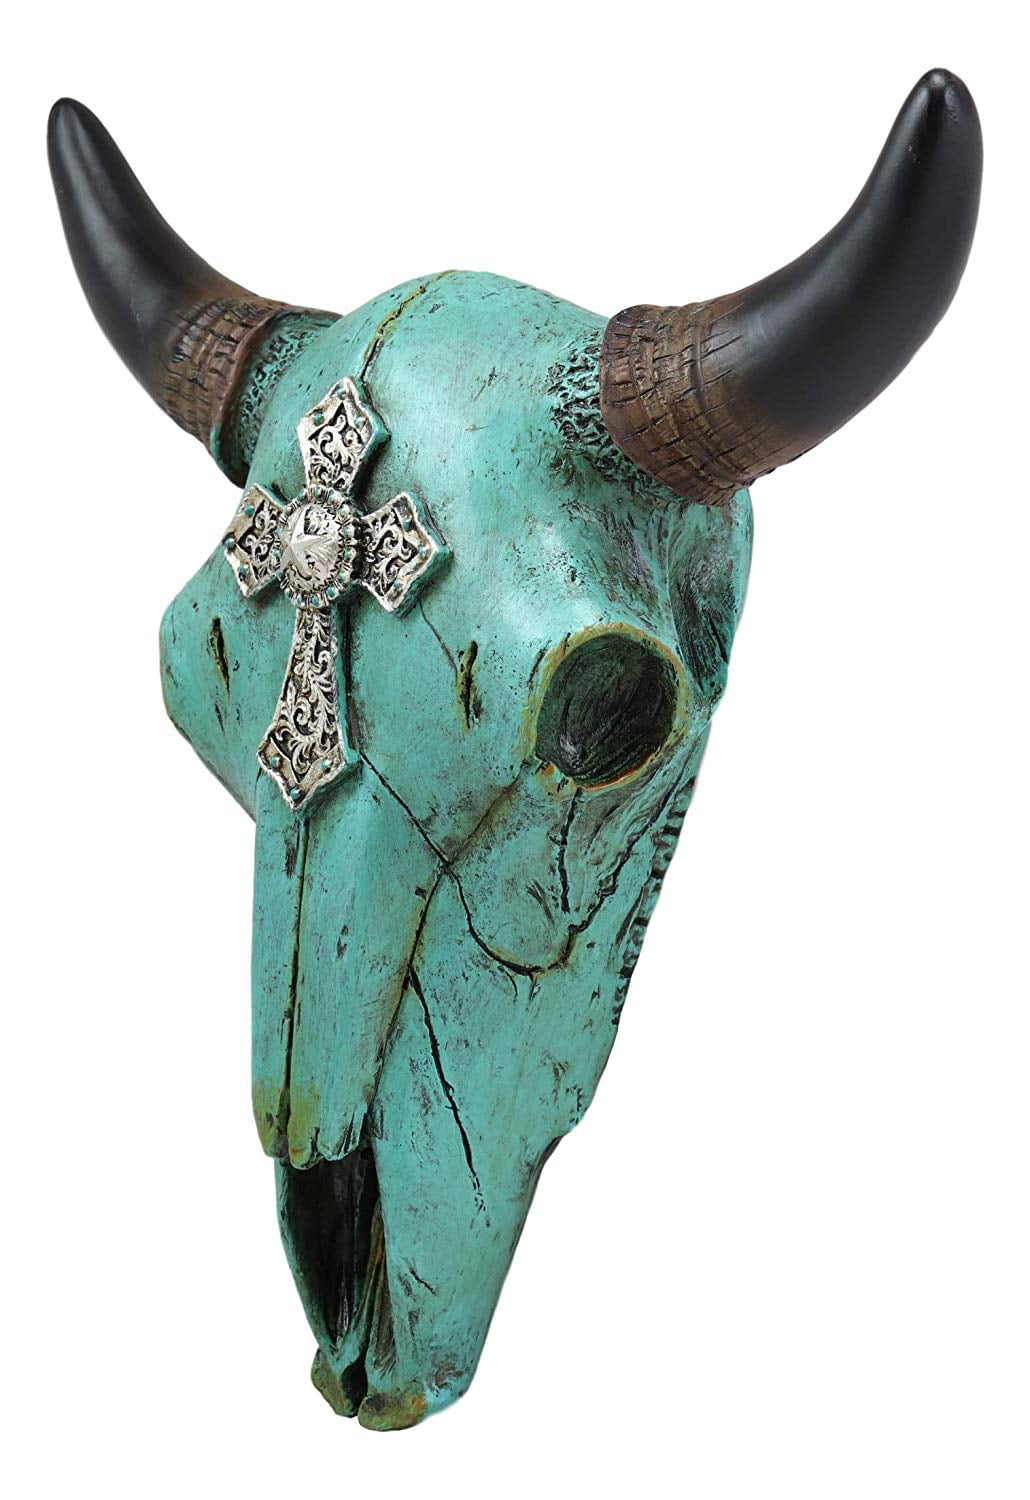 Details about   10"L Southwest Steer Bison Bull Cow Skull Turquoise With Scroll Heart Wall Decor 